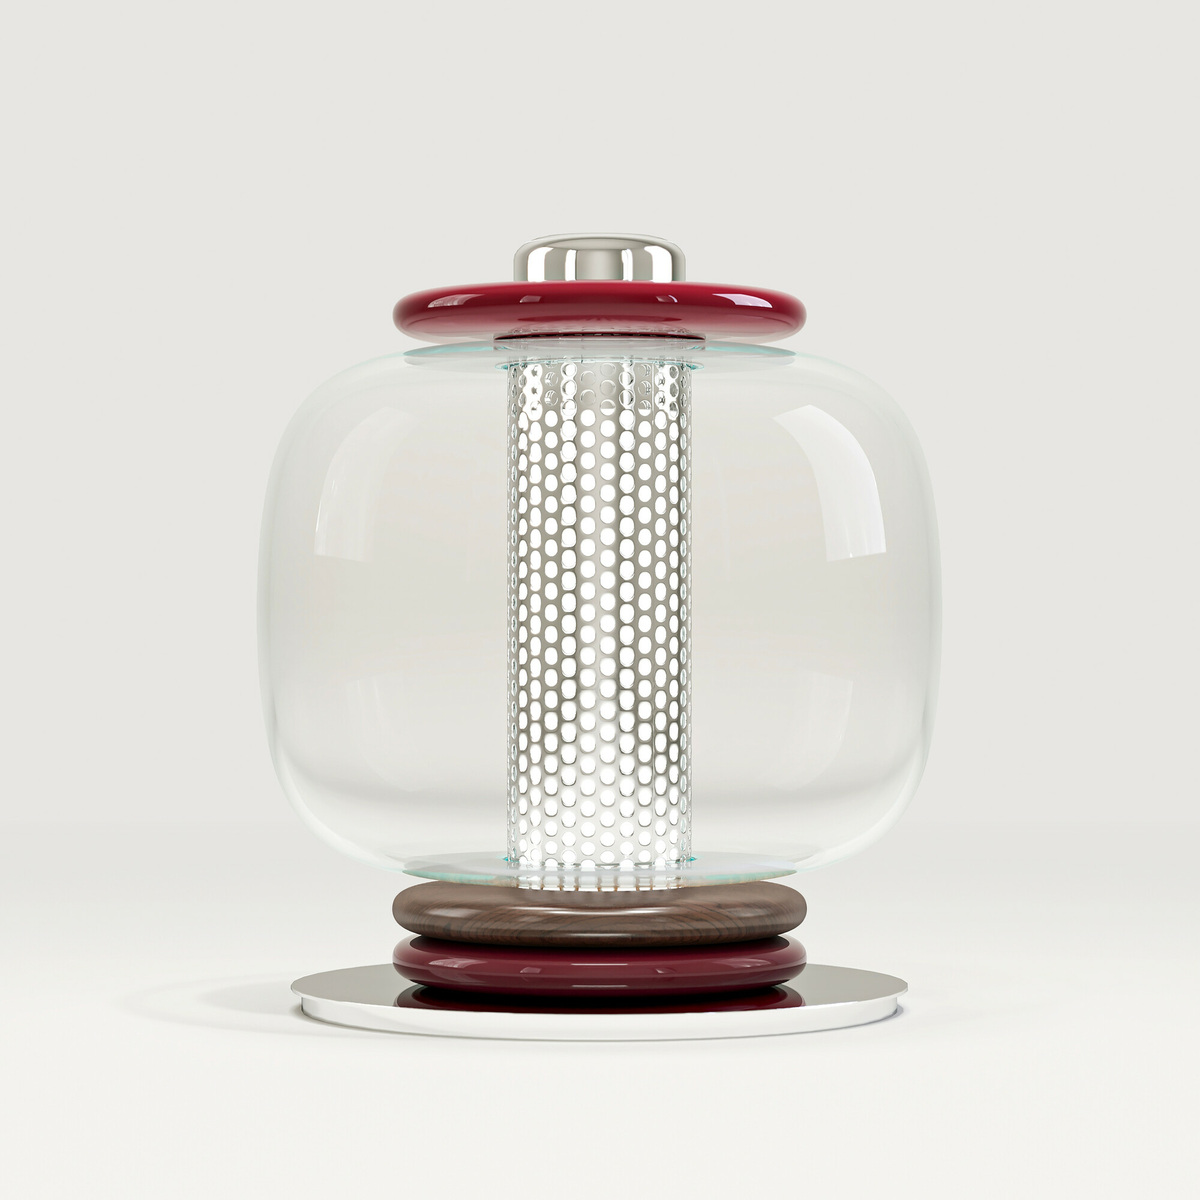 Luminaire Loulou | 1 module, Aubergine - H39 x ø34 cm - Blown glass/polished stainless steel - image 1